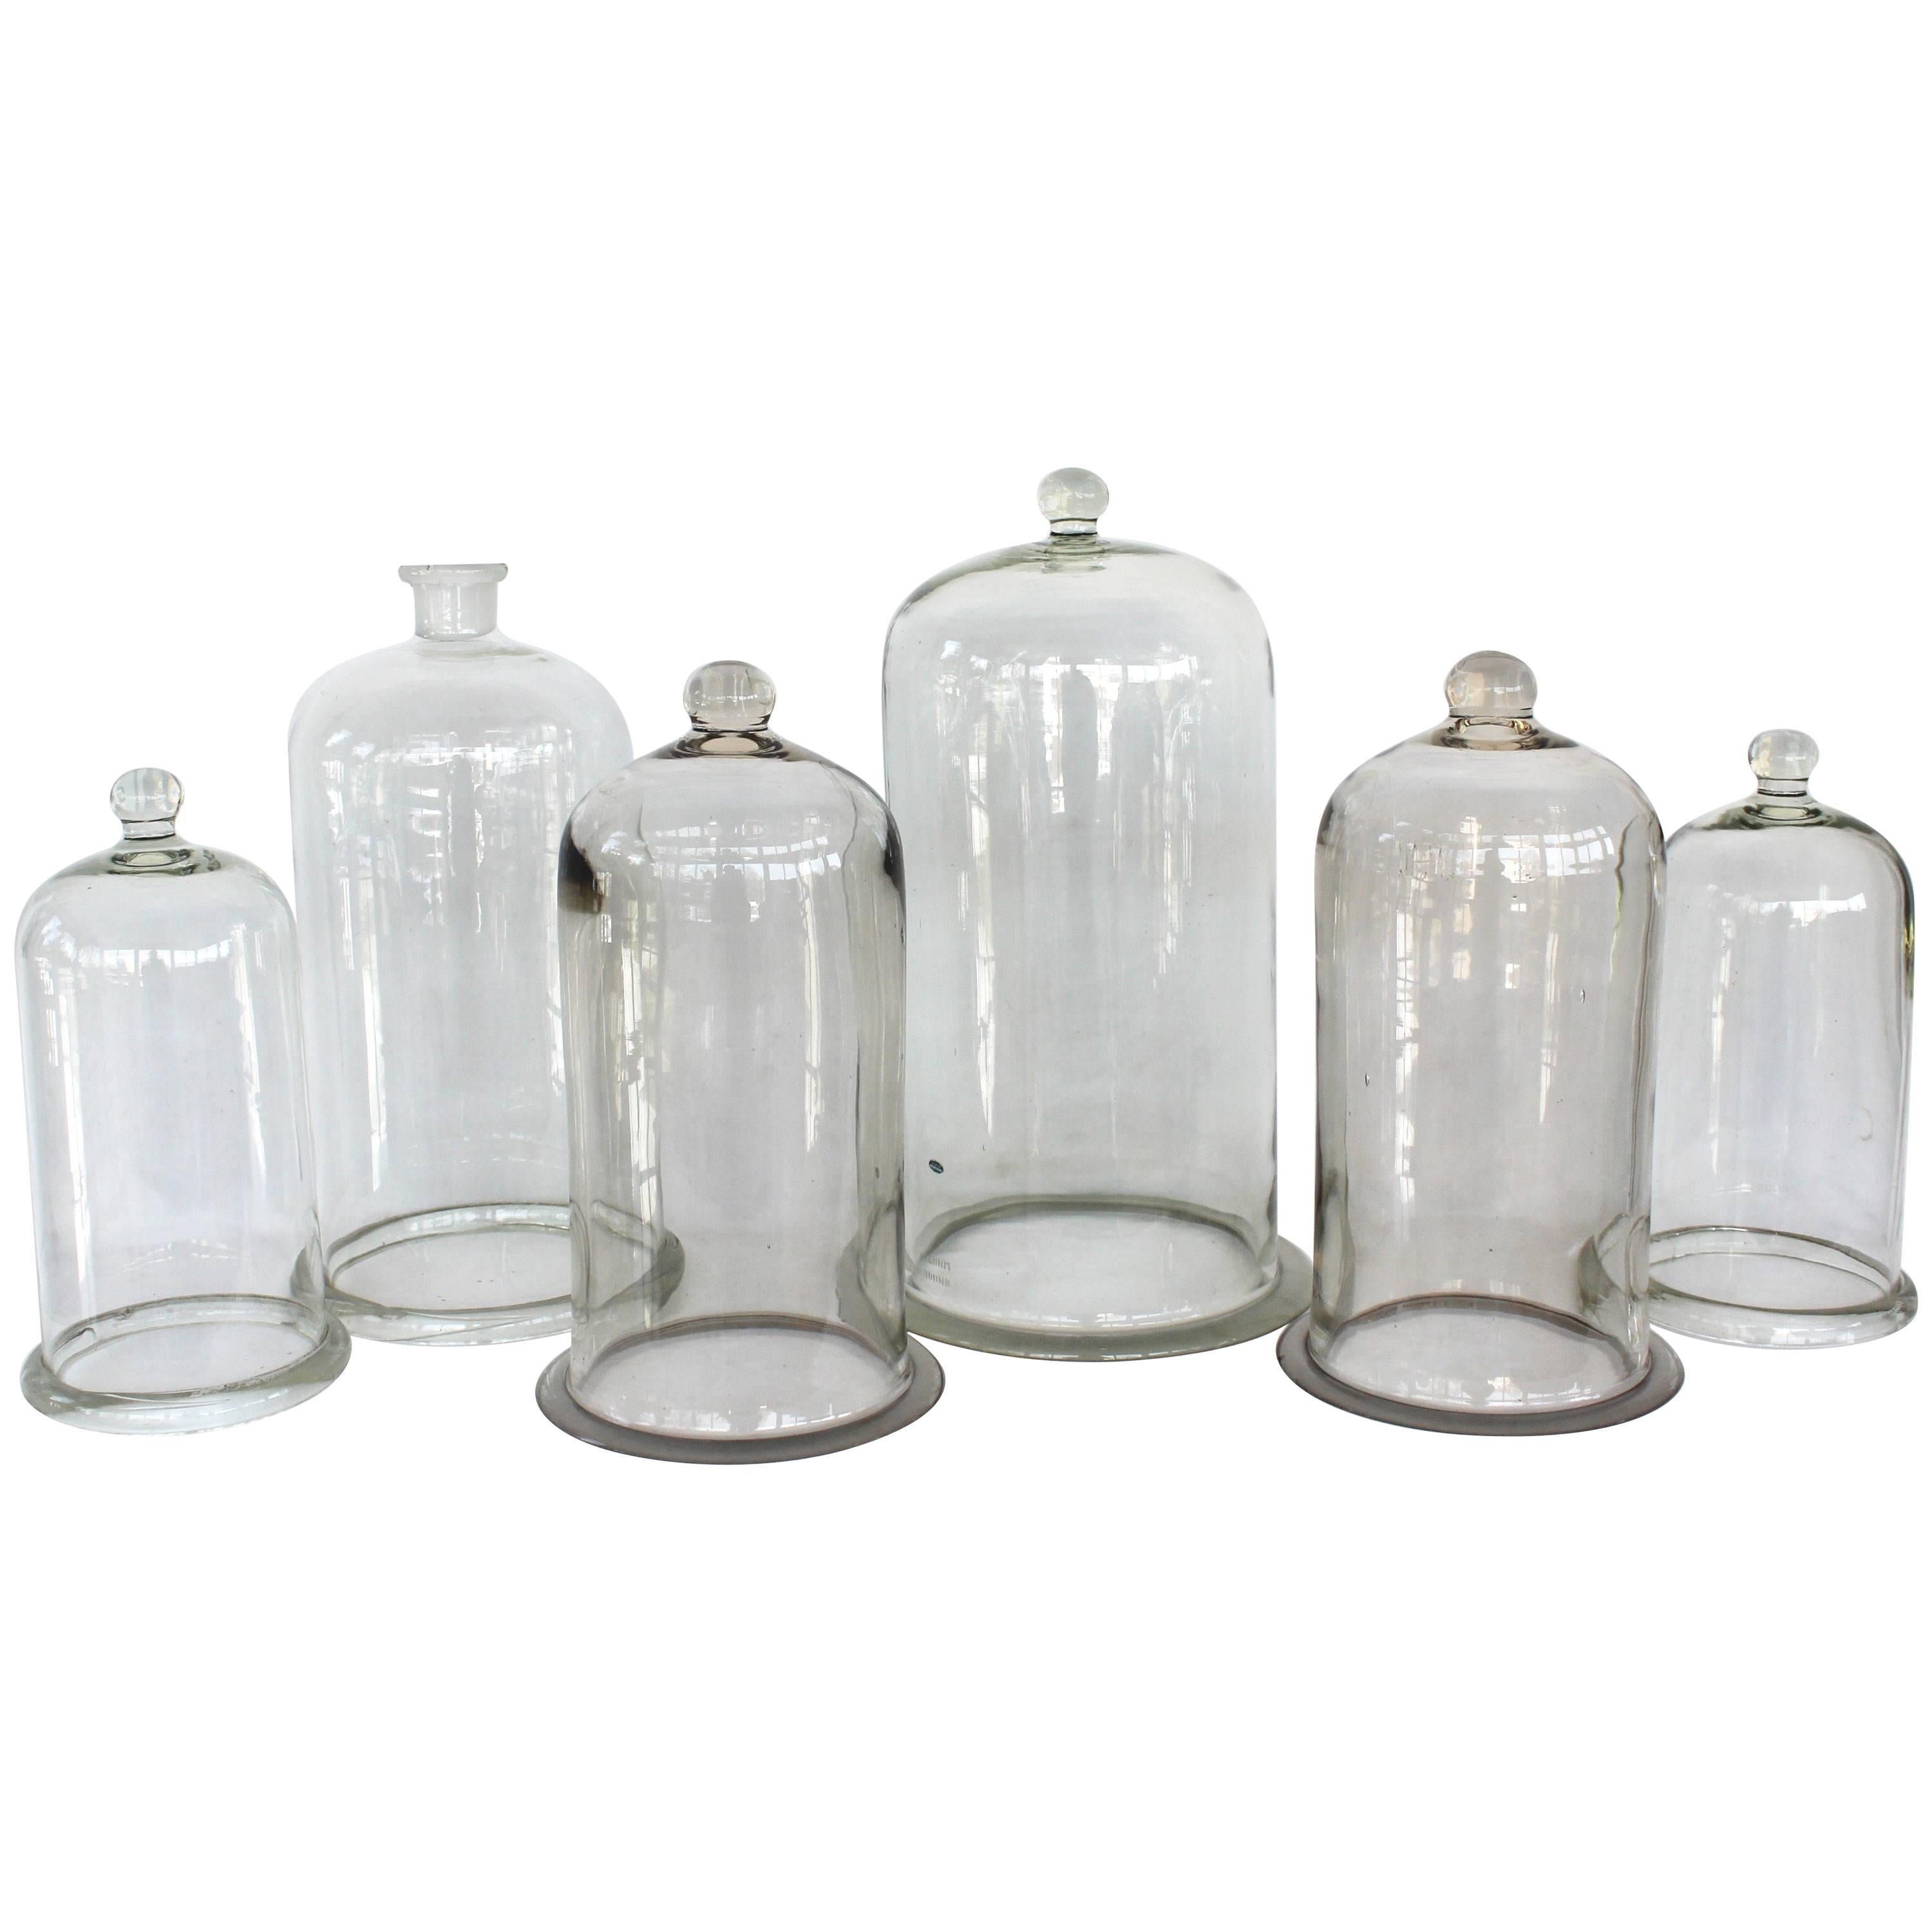 Collection of Antique Glass Cloches